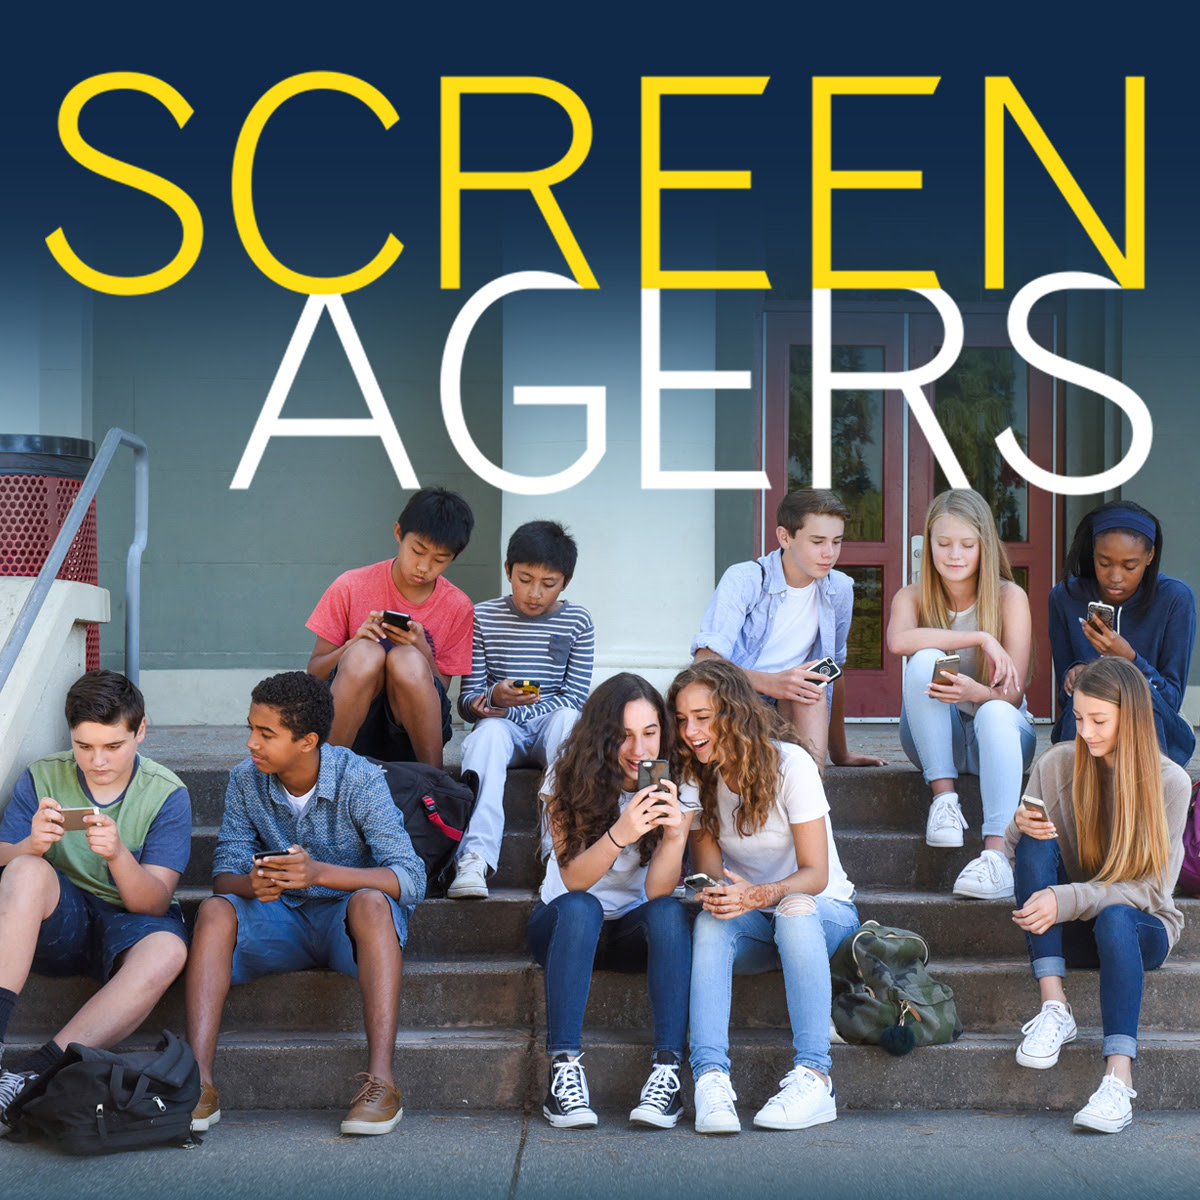 Screenagers Film Presented By Reisterstown United Methodist Church, in conjunction with Franklin Middle School, Franklin High School